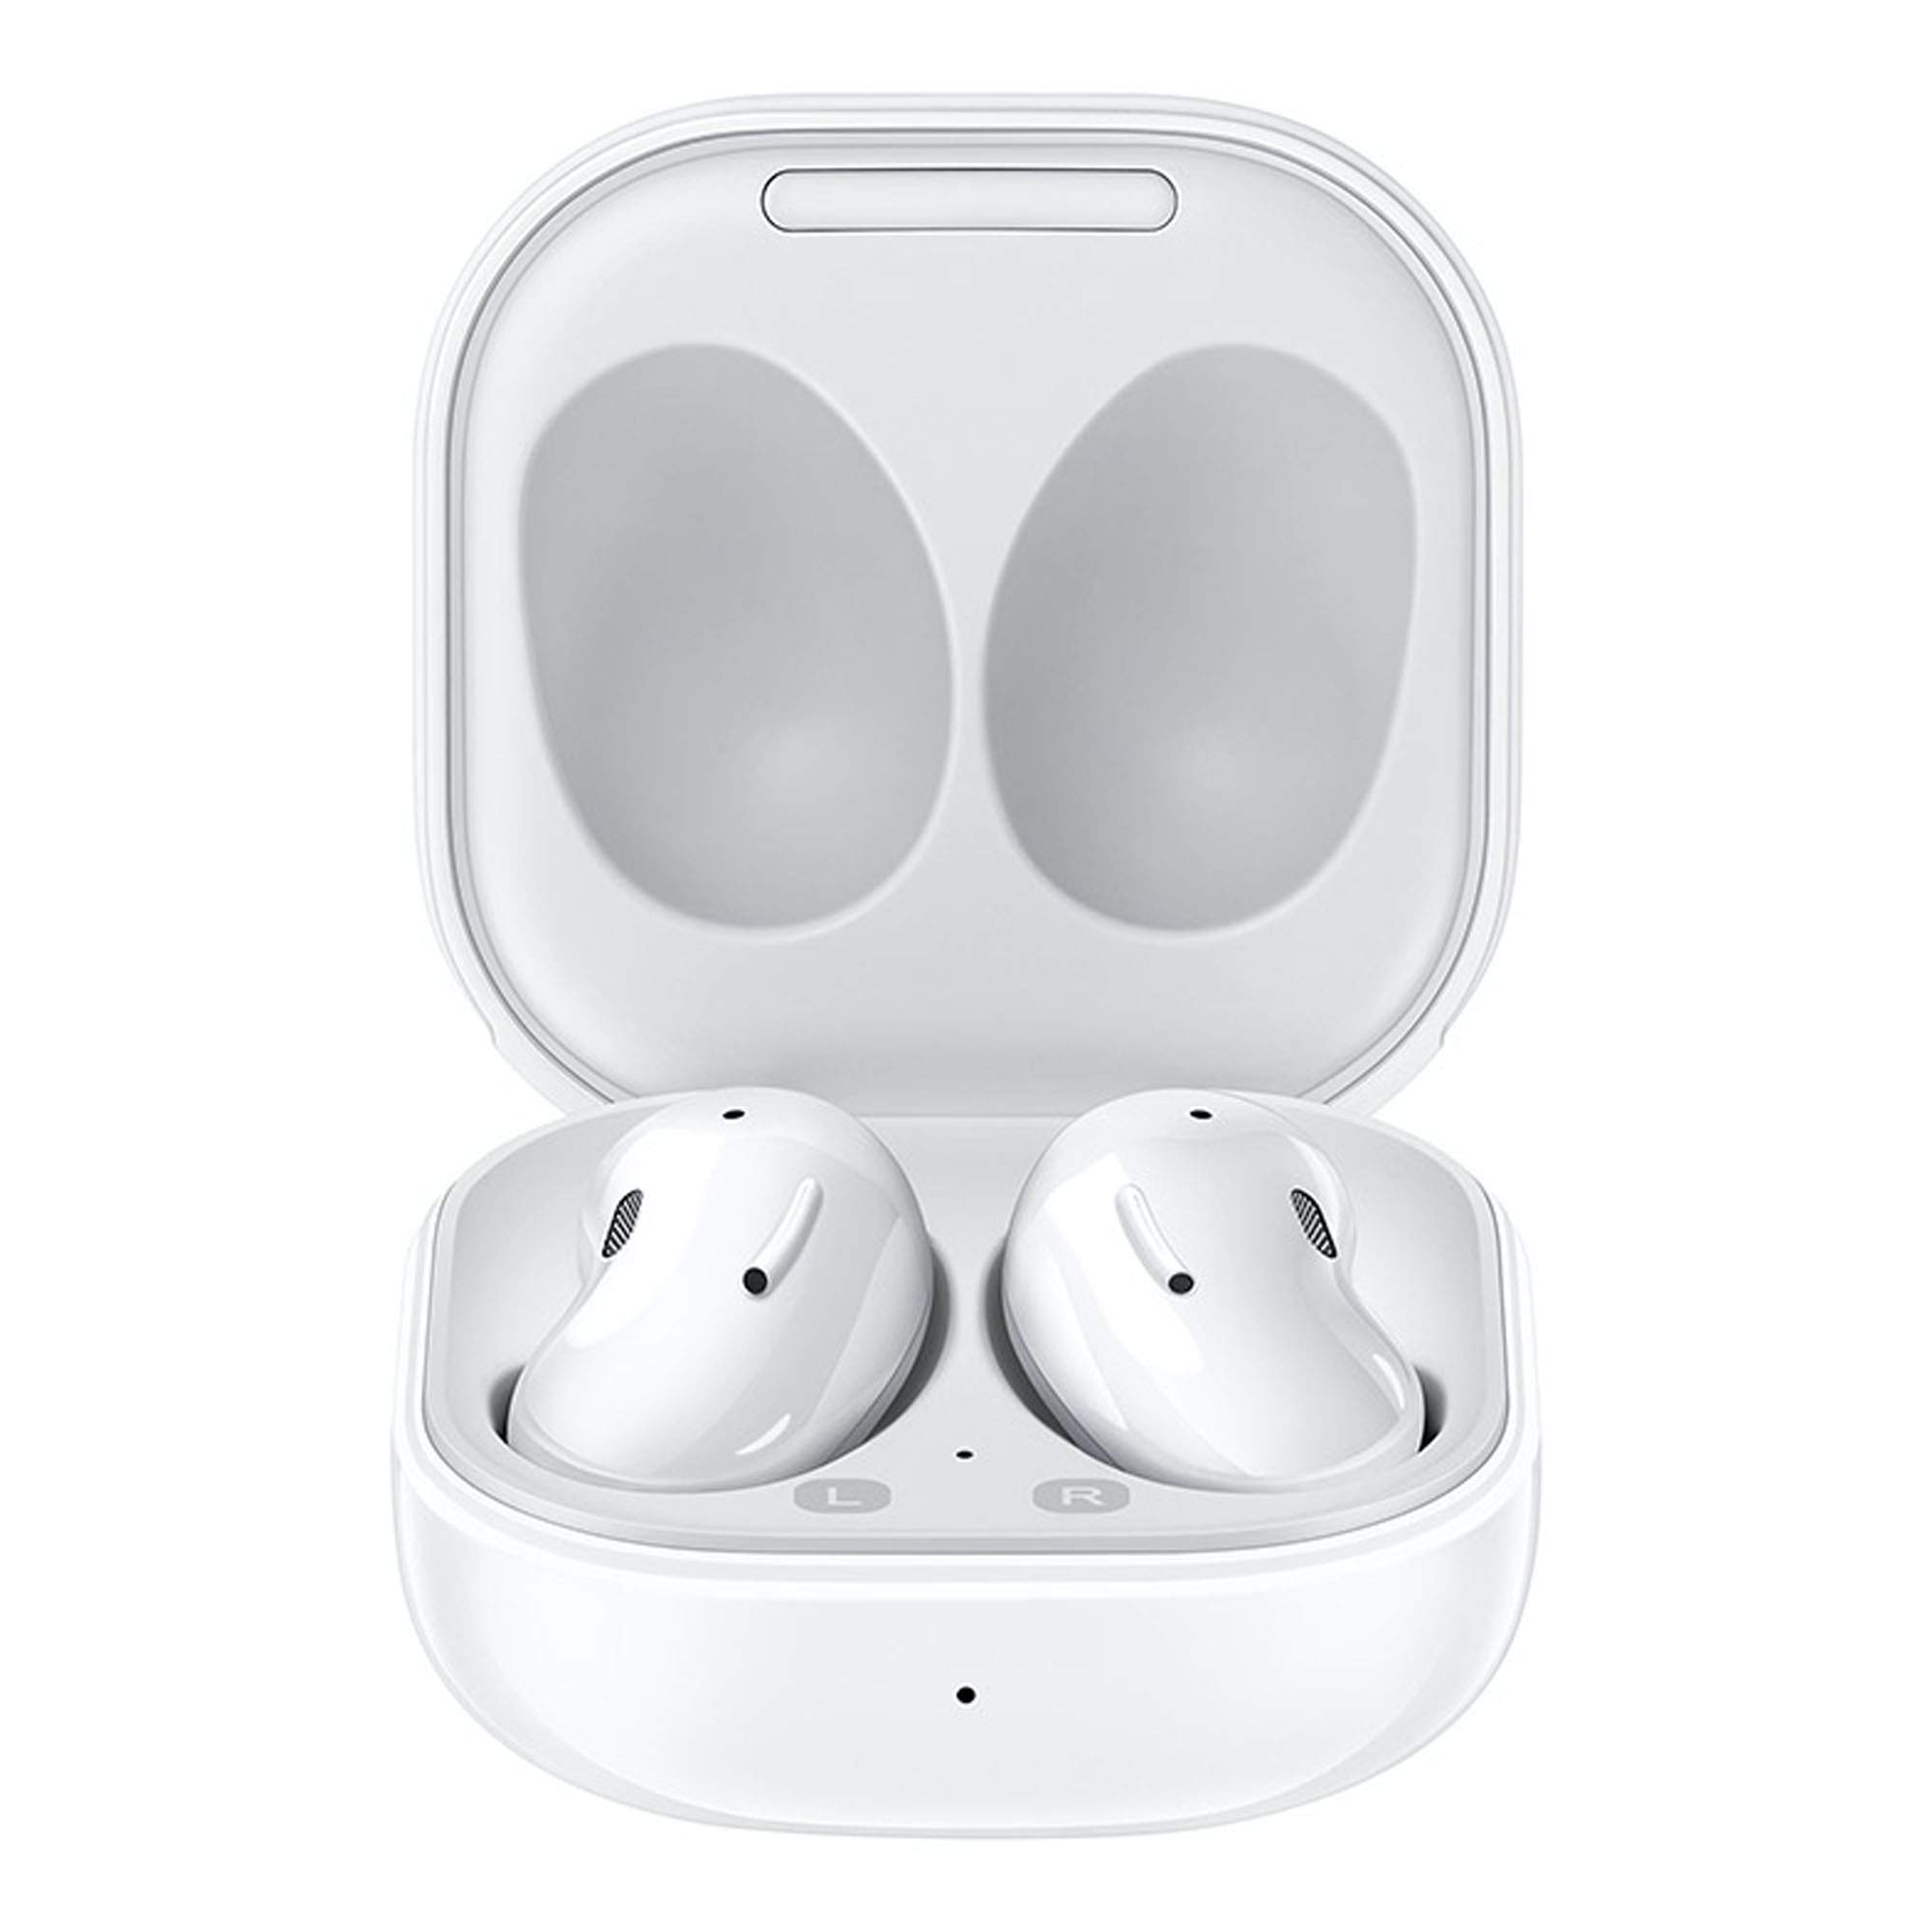 EHS64 3.5 mm Earphones with Remote - White